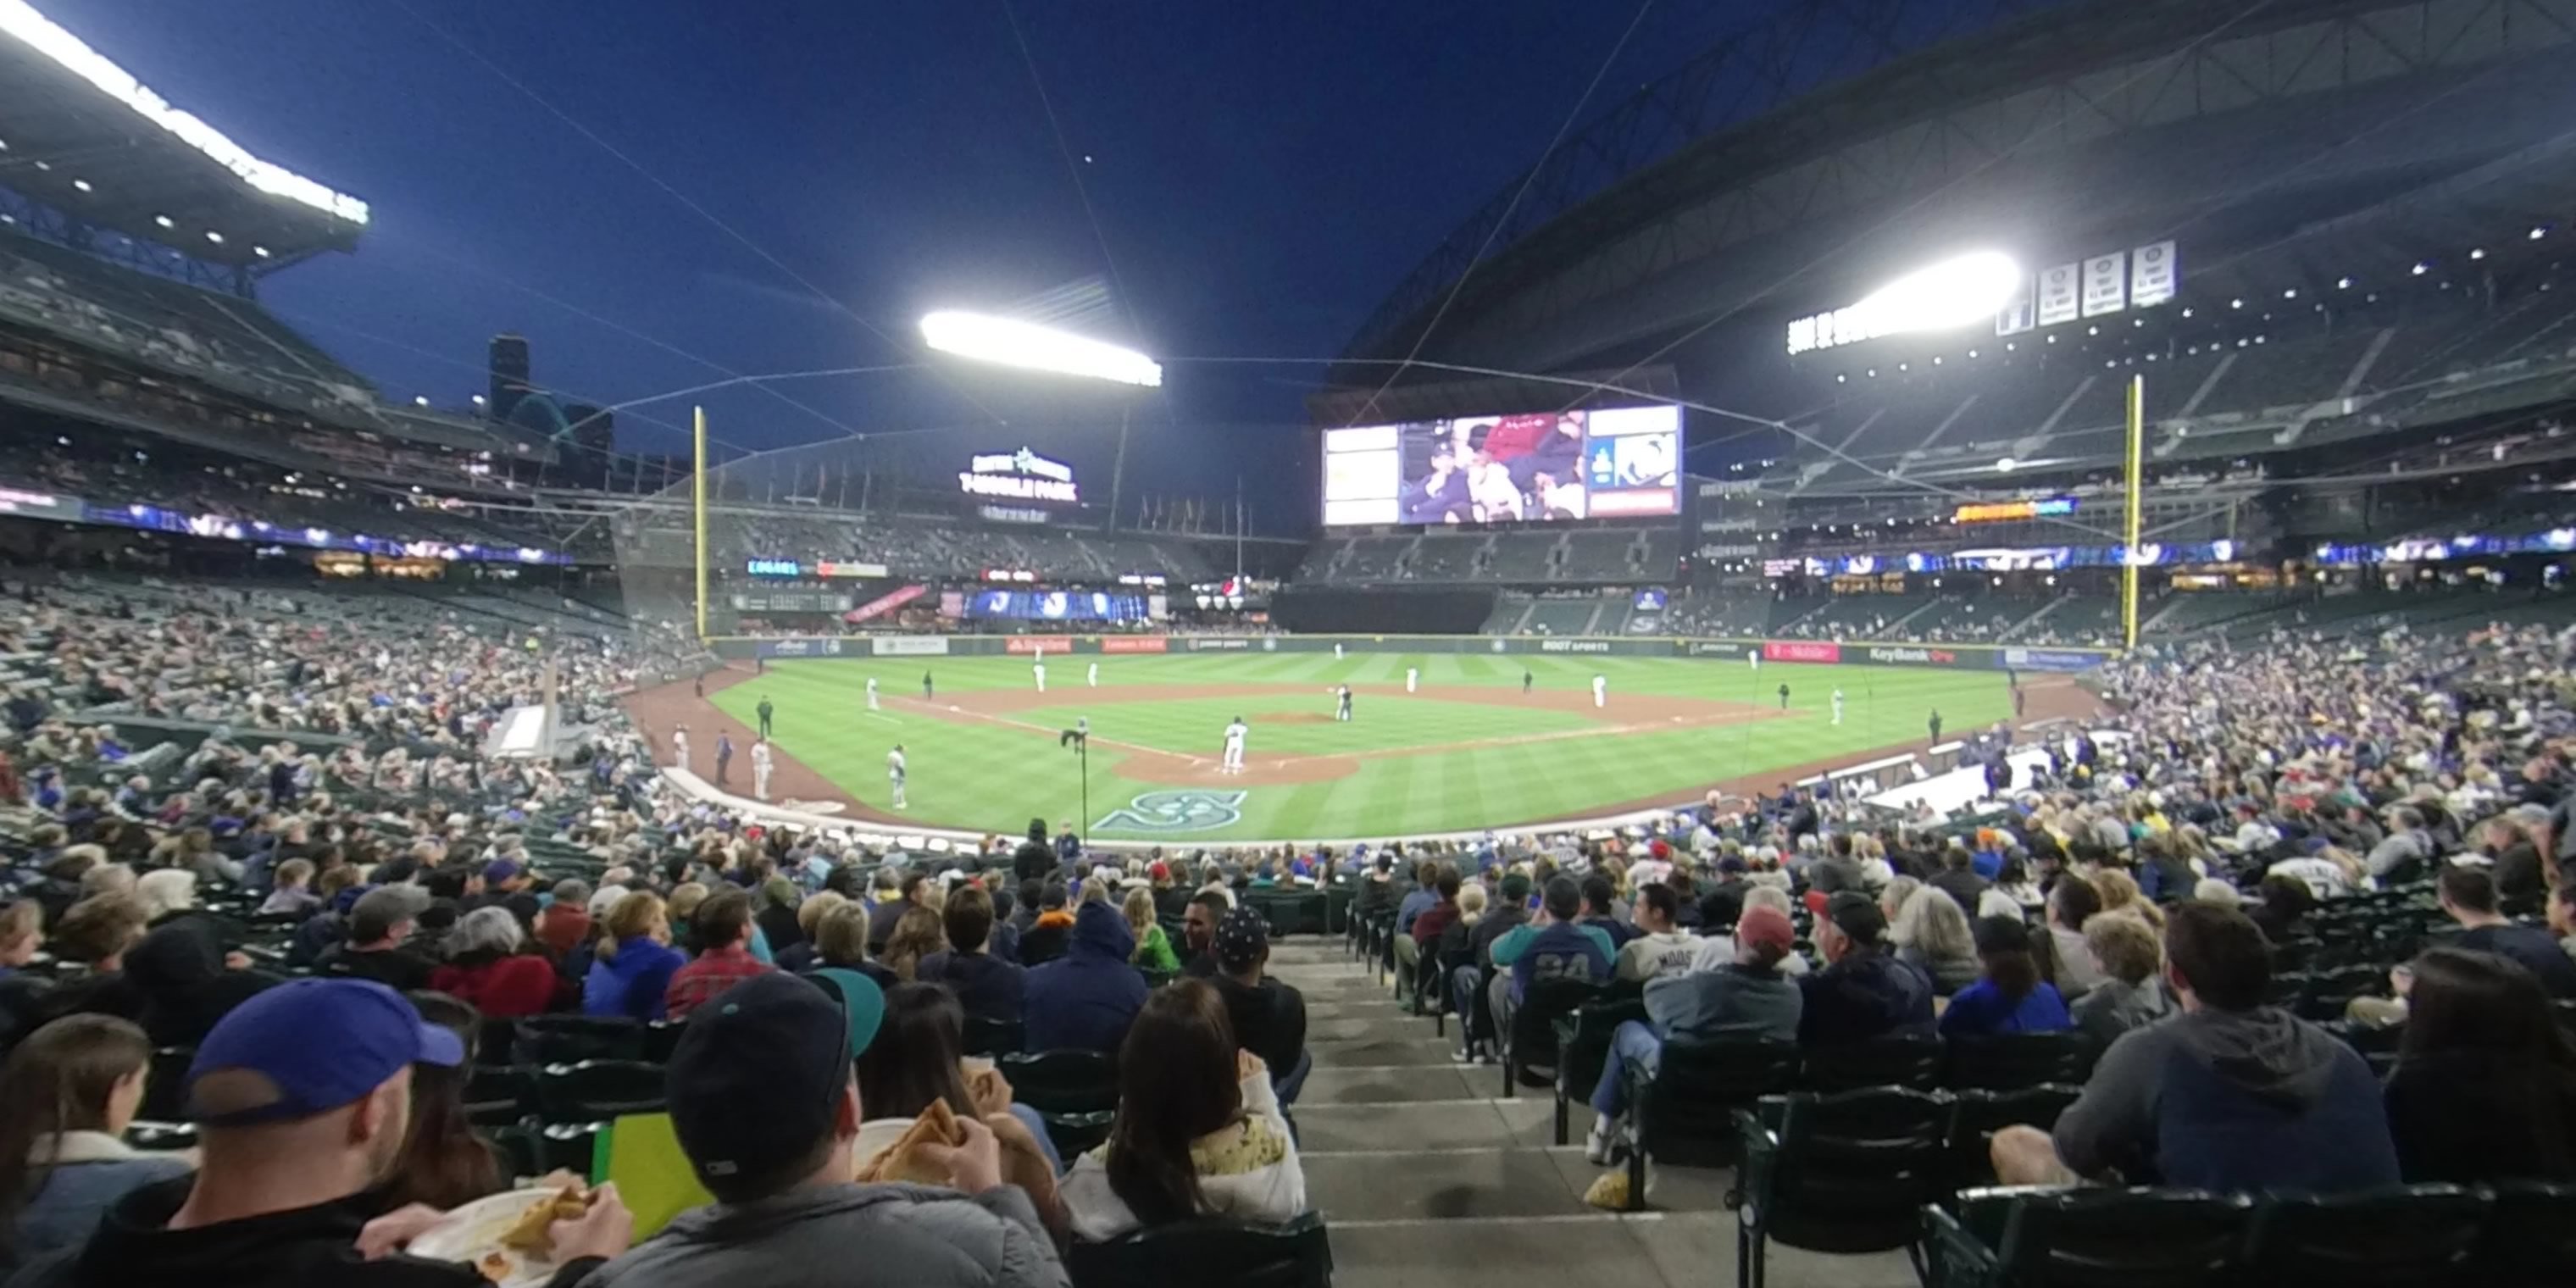 section 128 panoramic seat view  for baseball - t-mobile park